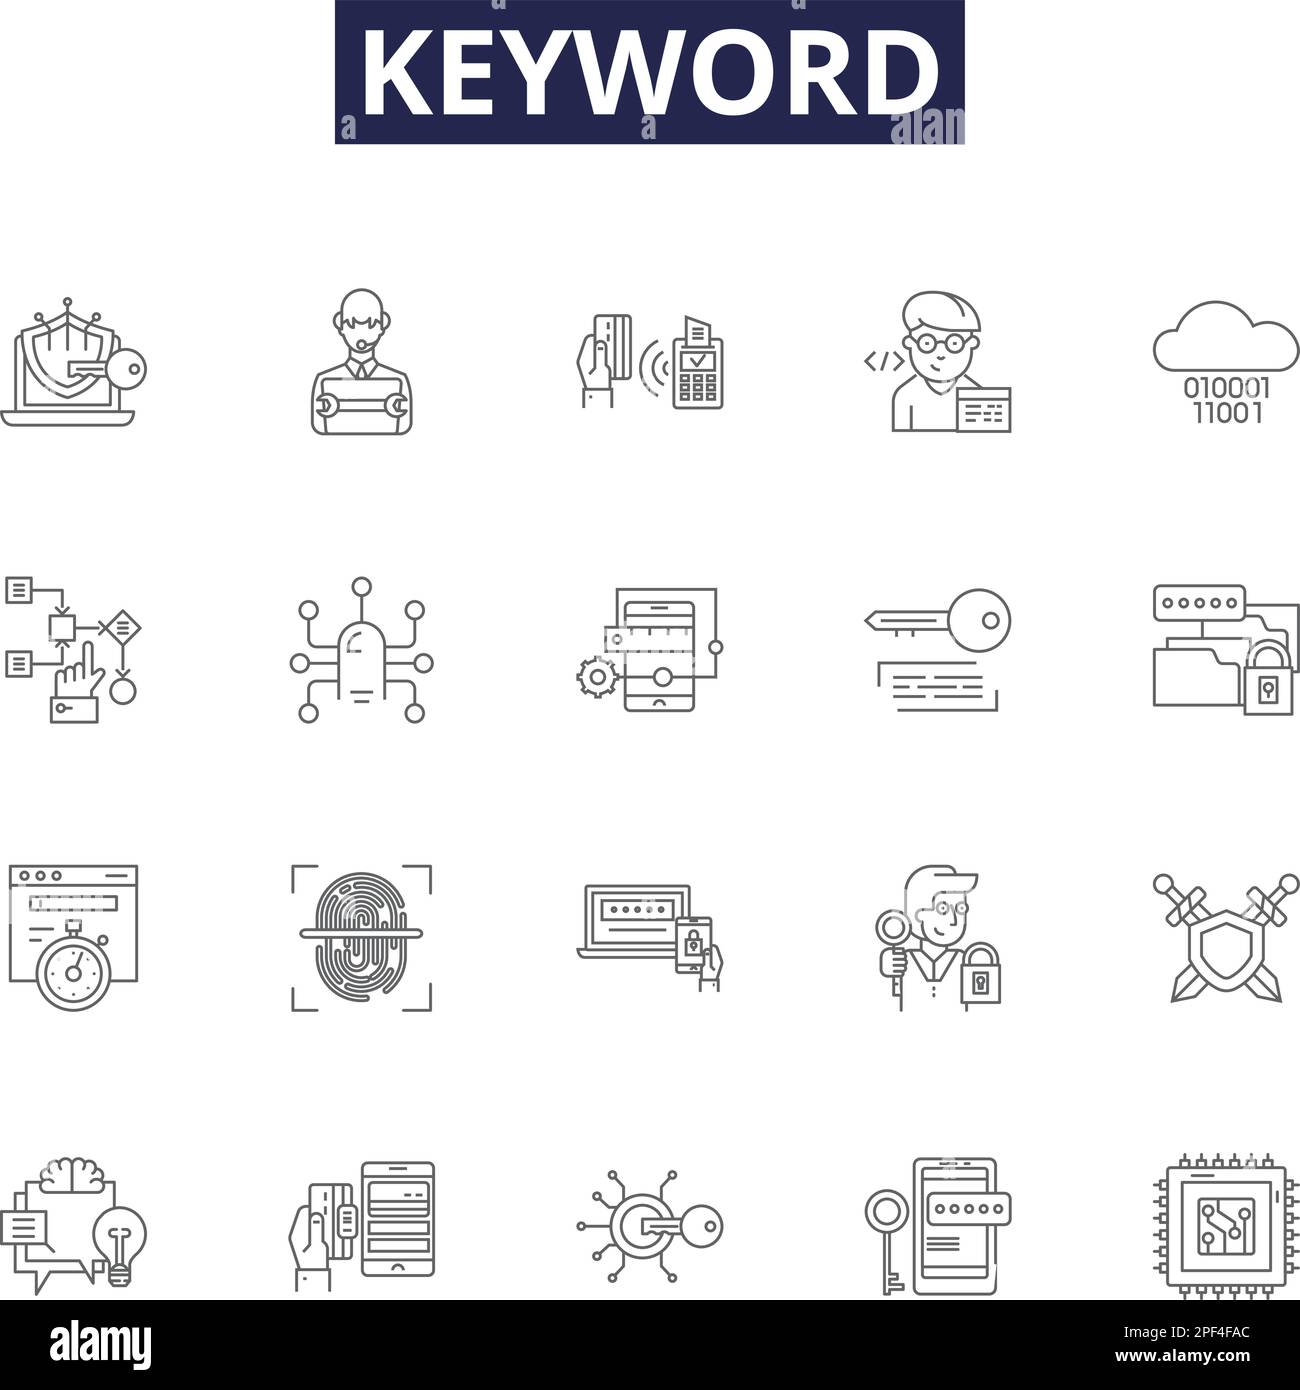 Keyword line vector icons and signs. Phrases, Search, Terms, Queries, Tags, Cues, Keywords, Signals outline vector illustration set Stock Vector